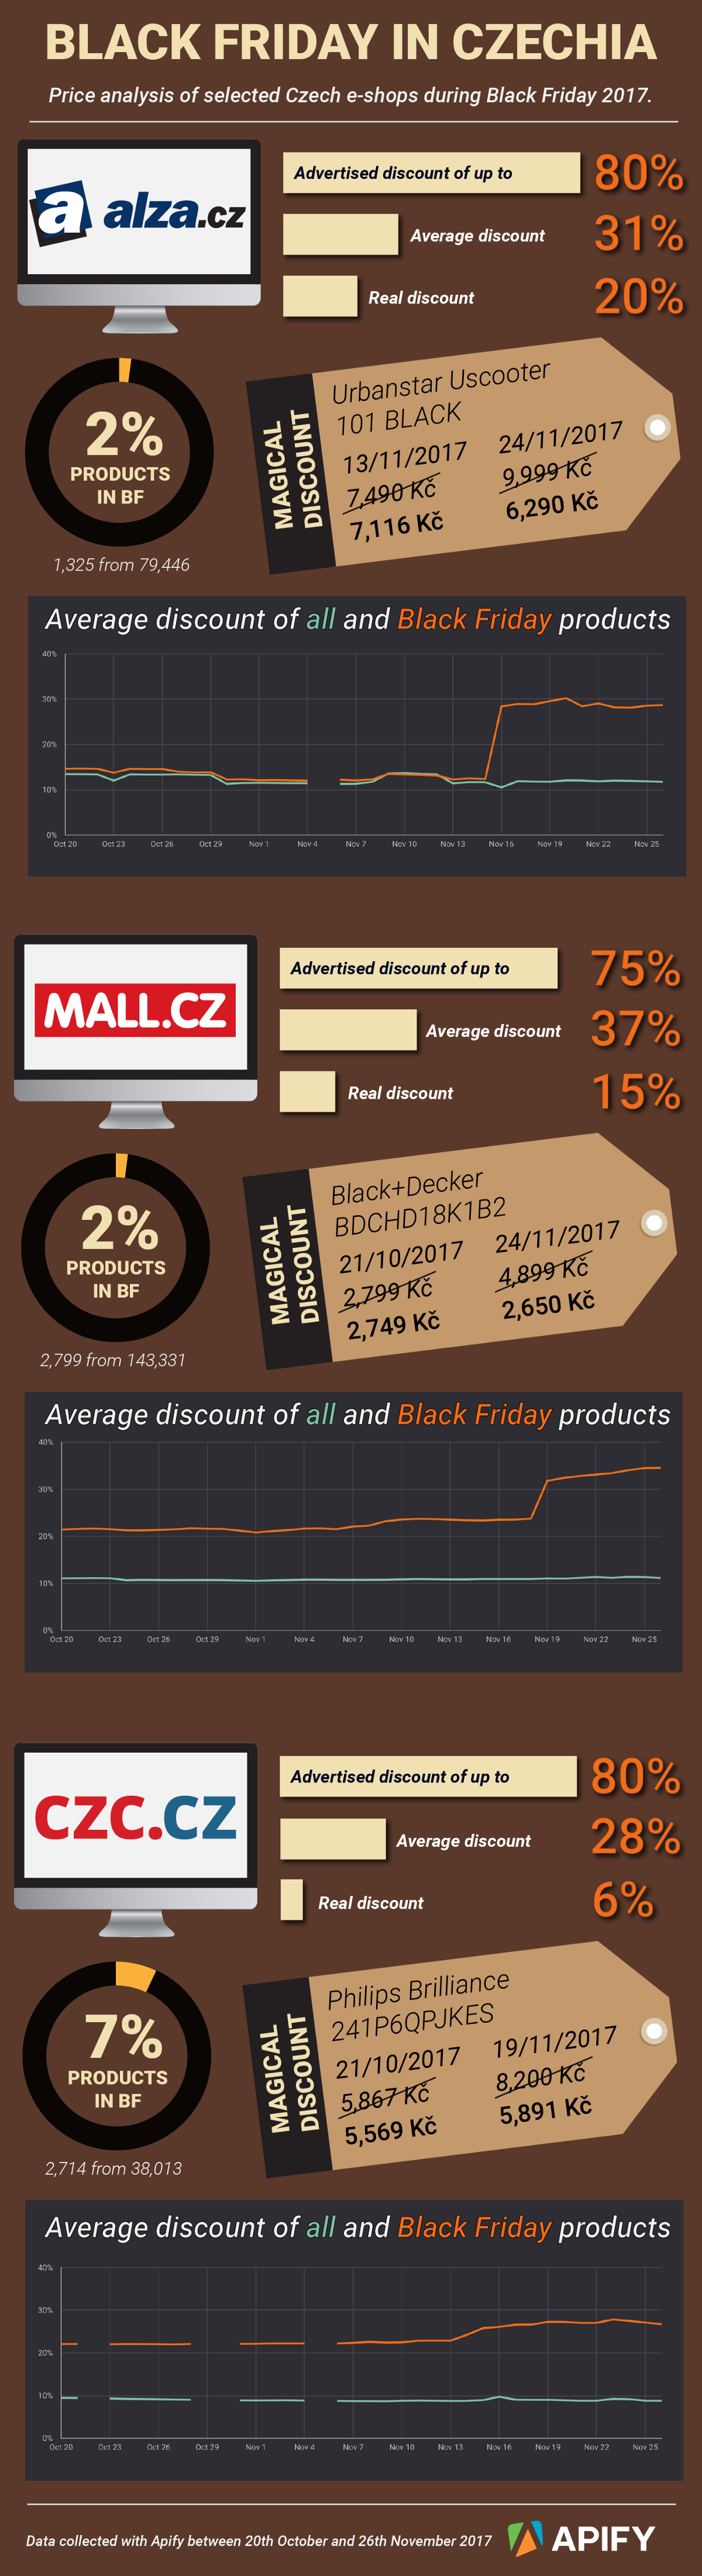 Magical Black Friday prices in Czechia